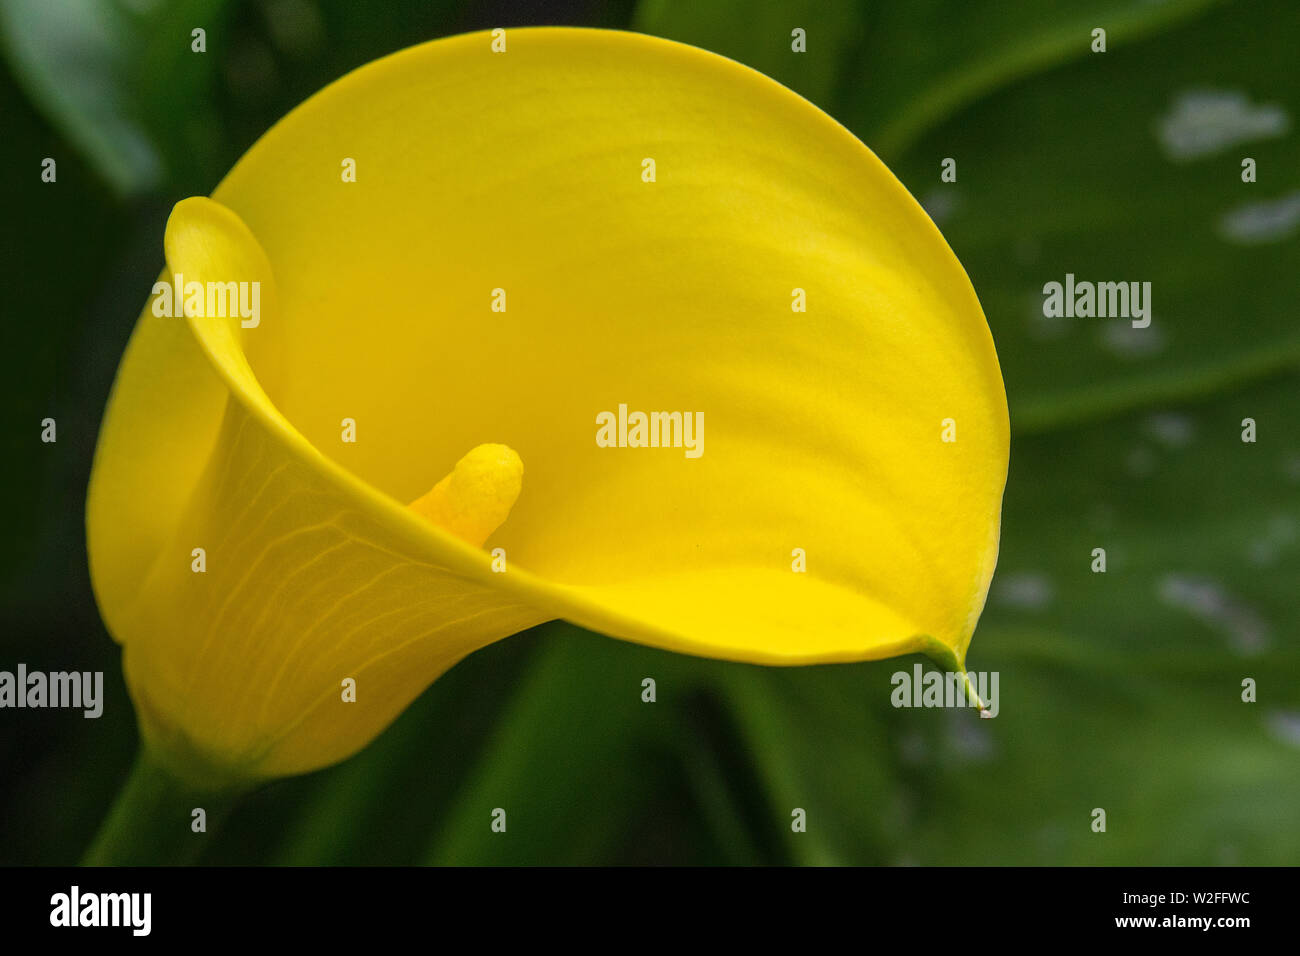 A close-up of a beautiful yellow Zantedeschia flower - also known as a Calla Lily or Arum Lily. Stock Photo